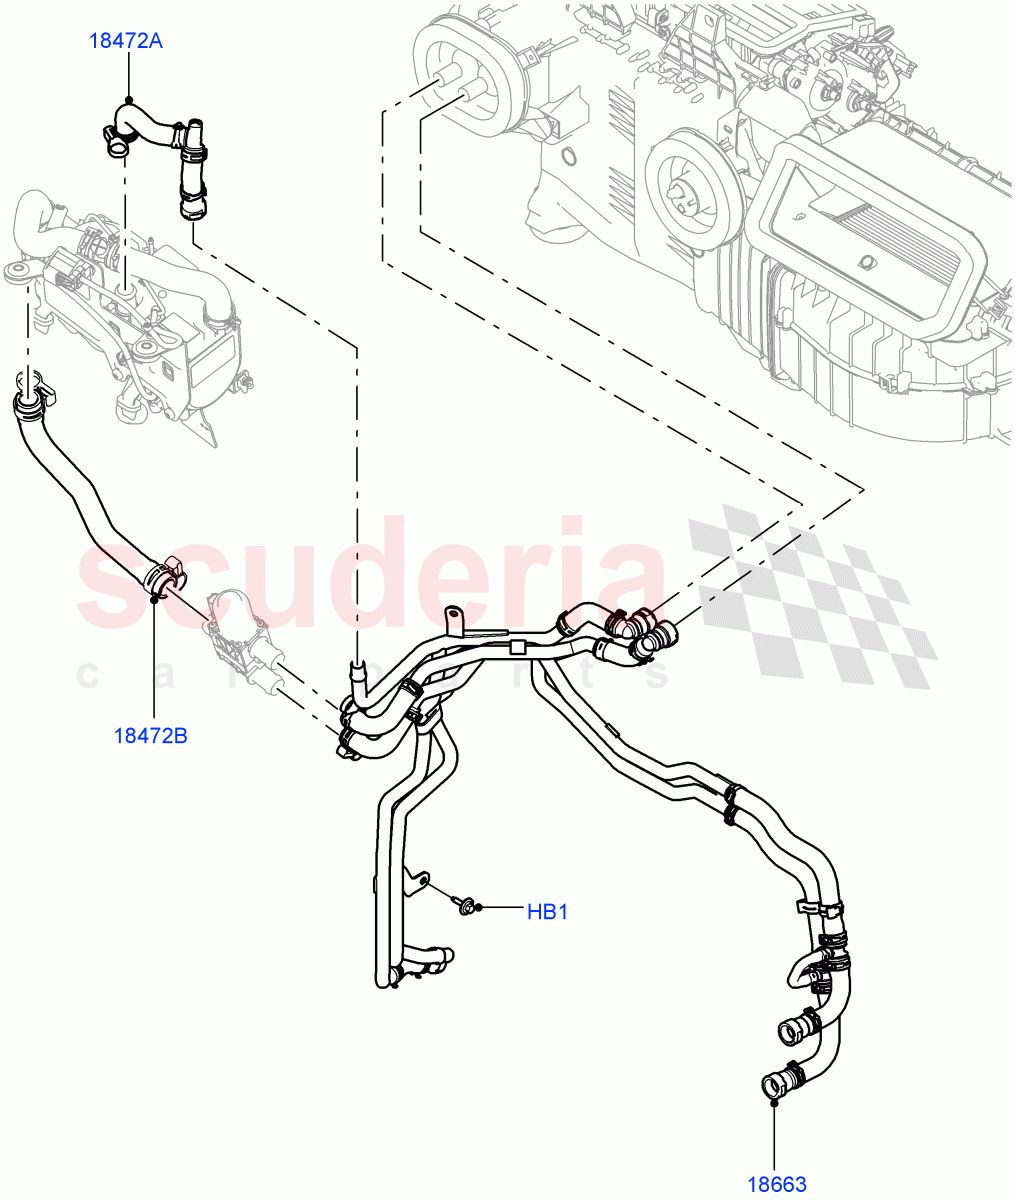 Heater Hoses(Front)(2.0L I4 DSL HIGH DOHC AJ200,With Fuel Fired Heater,With Air Conditioning - Front/Rear,Park Heating With Remote Control)((V)FROMHA000001,(V)TOHA999999) of Land Rover Land Rover Range Rover Sport (2014+) [3.0 DOHC GDI SC V6 Petrol]